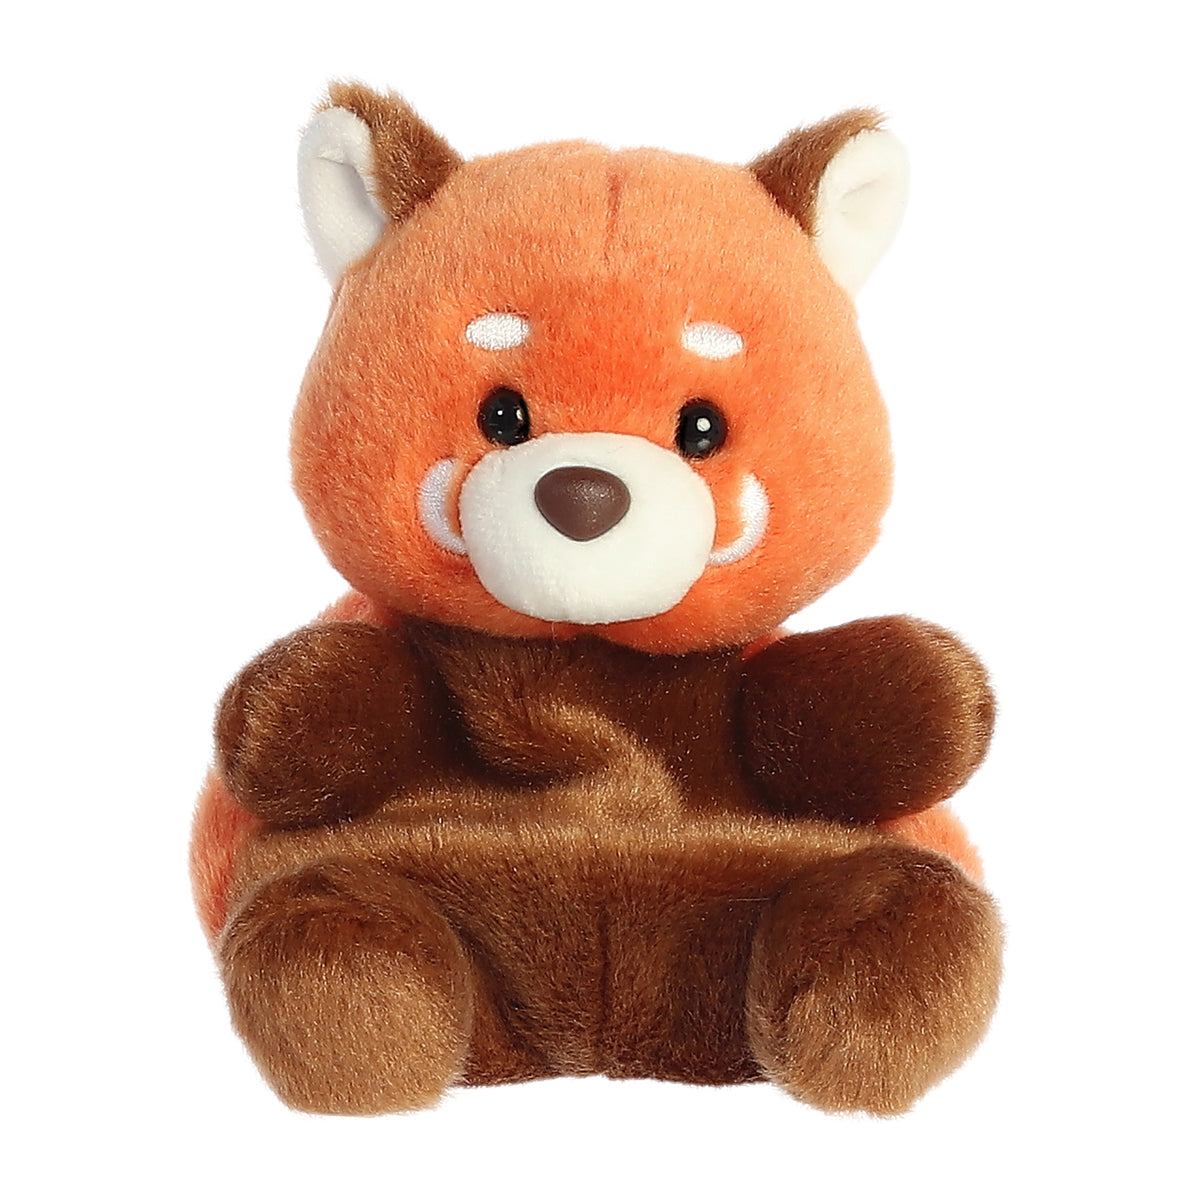 Red Panda plush from Palm Pals, with a lively orange and brown body, looking up invitingly for play and cuddles.